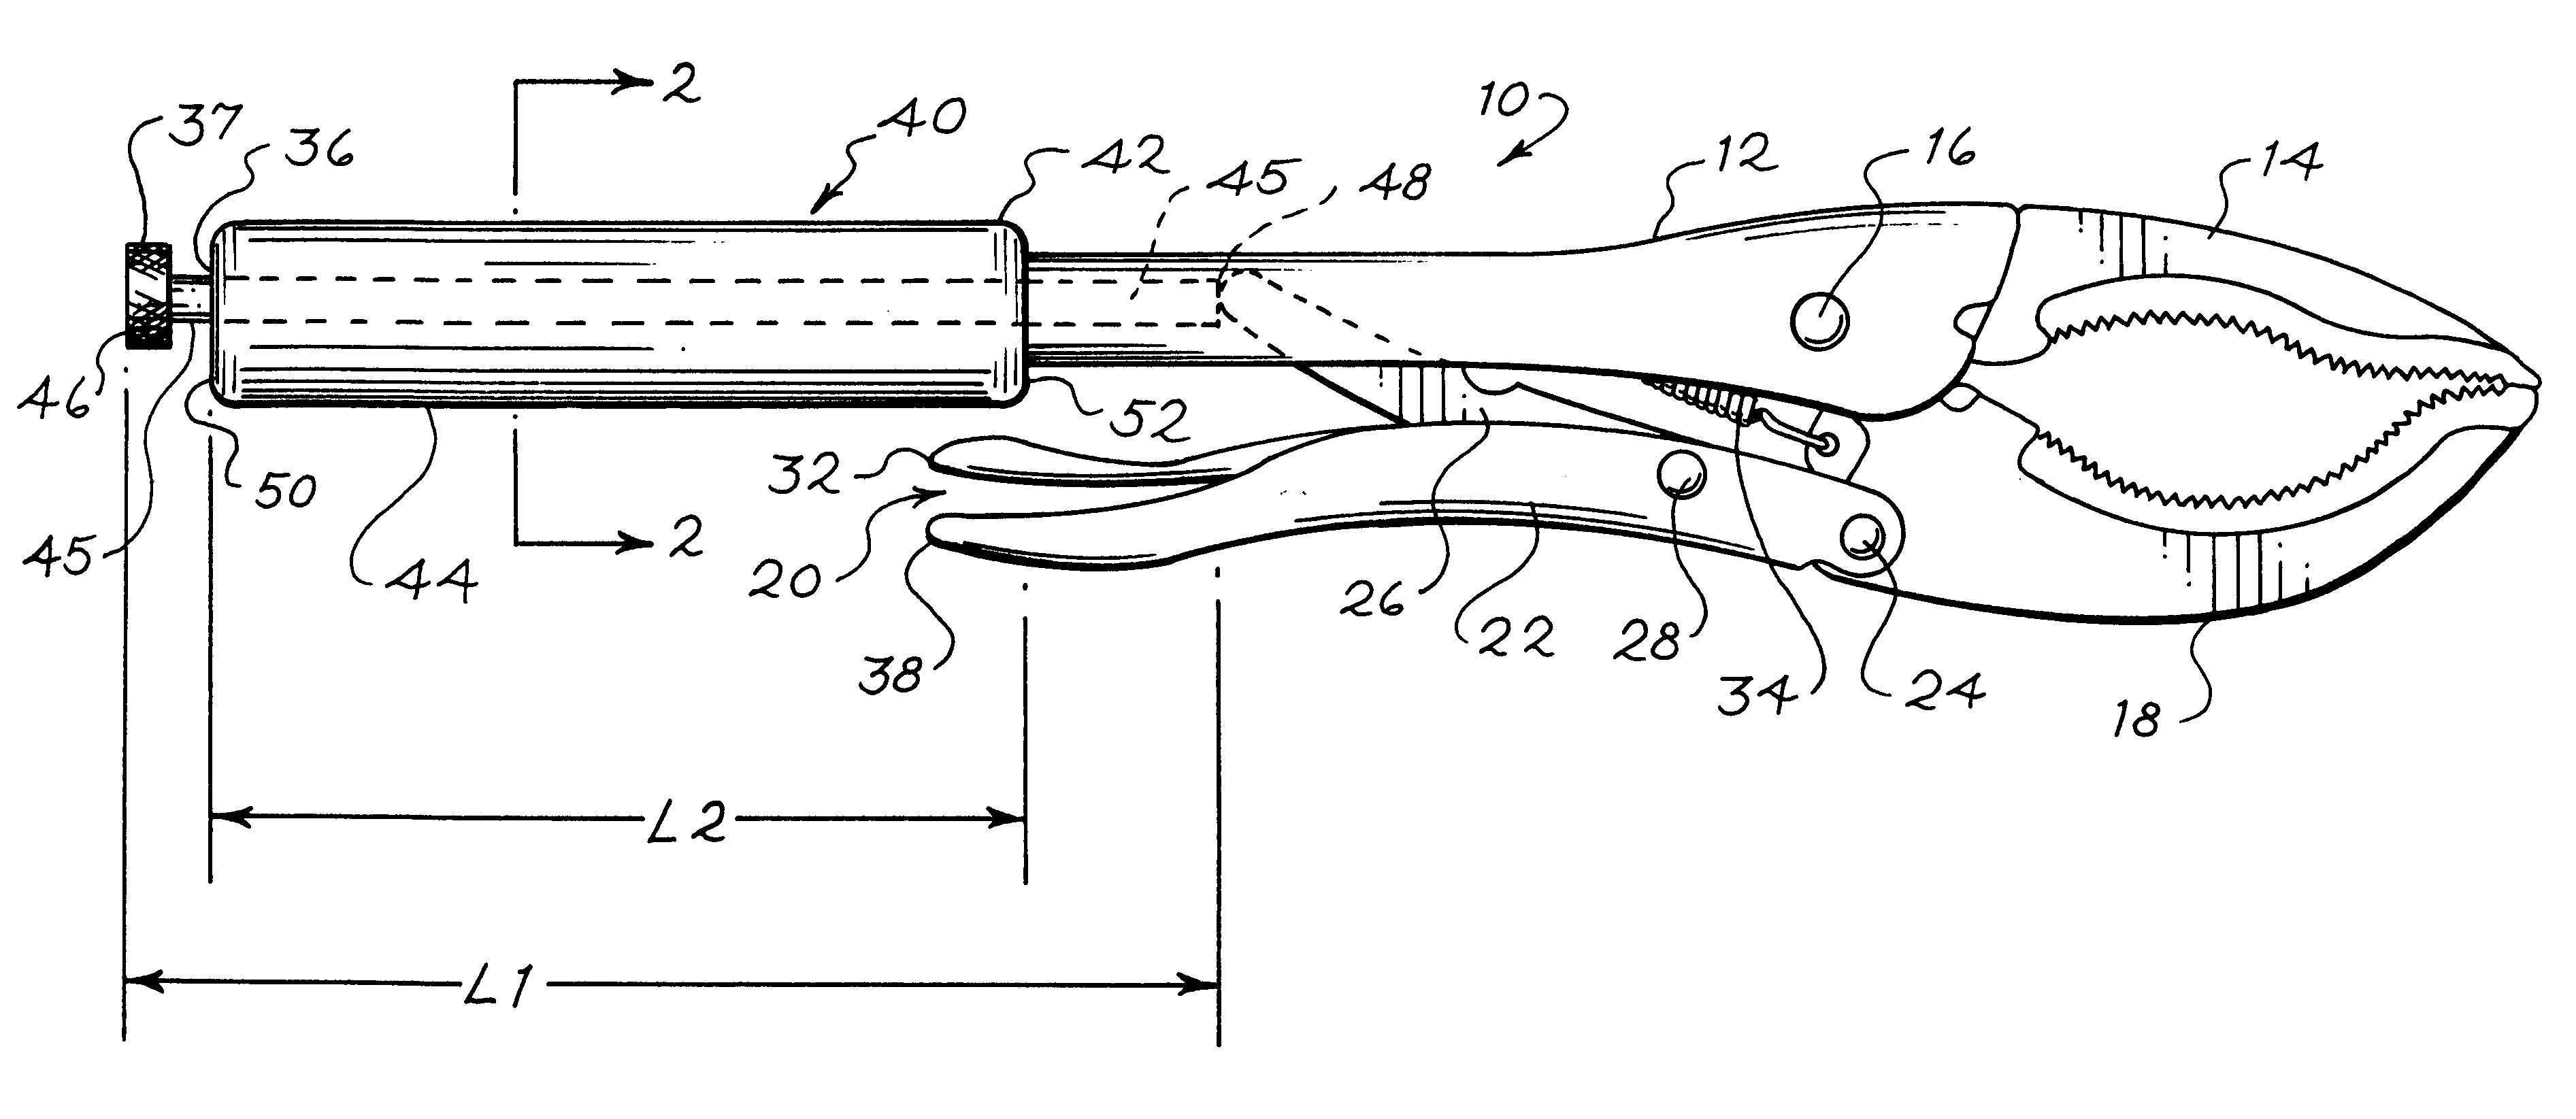 Locking pliers with extended grip